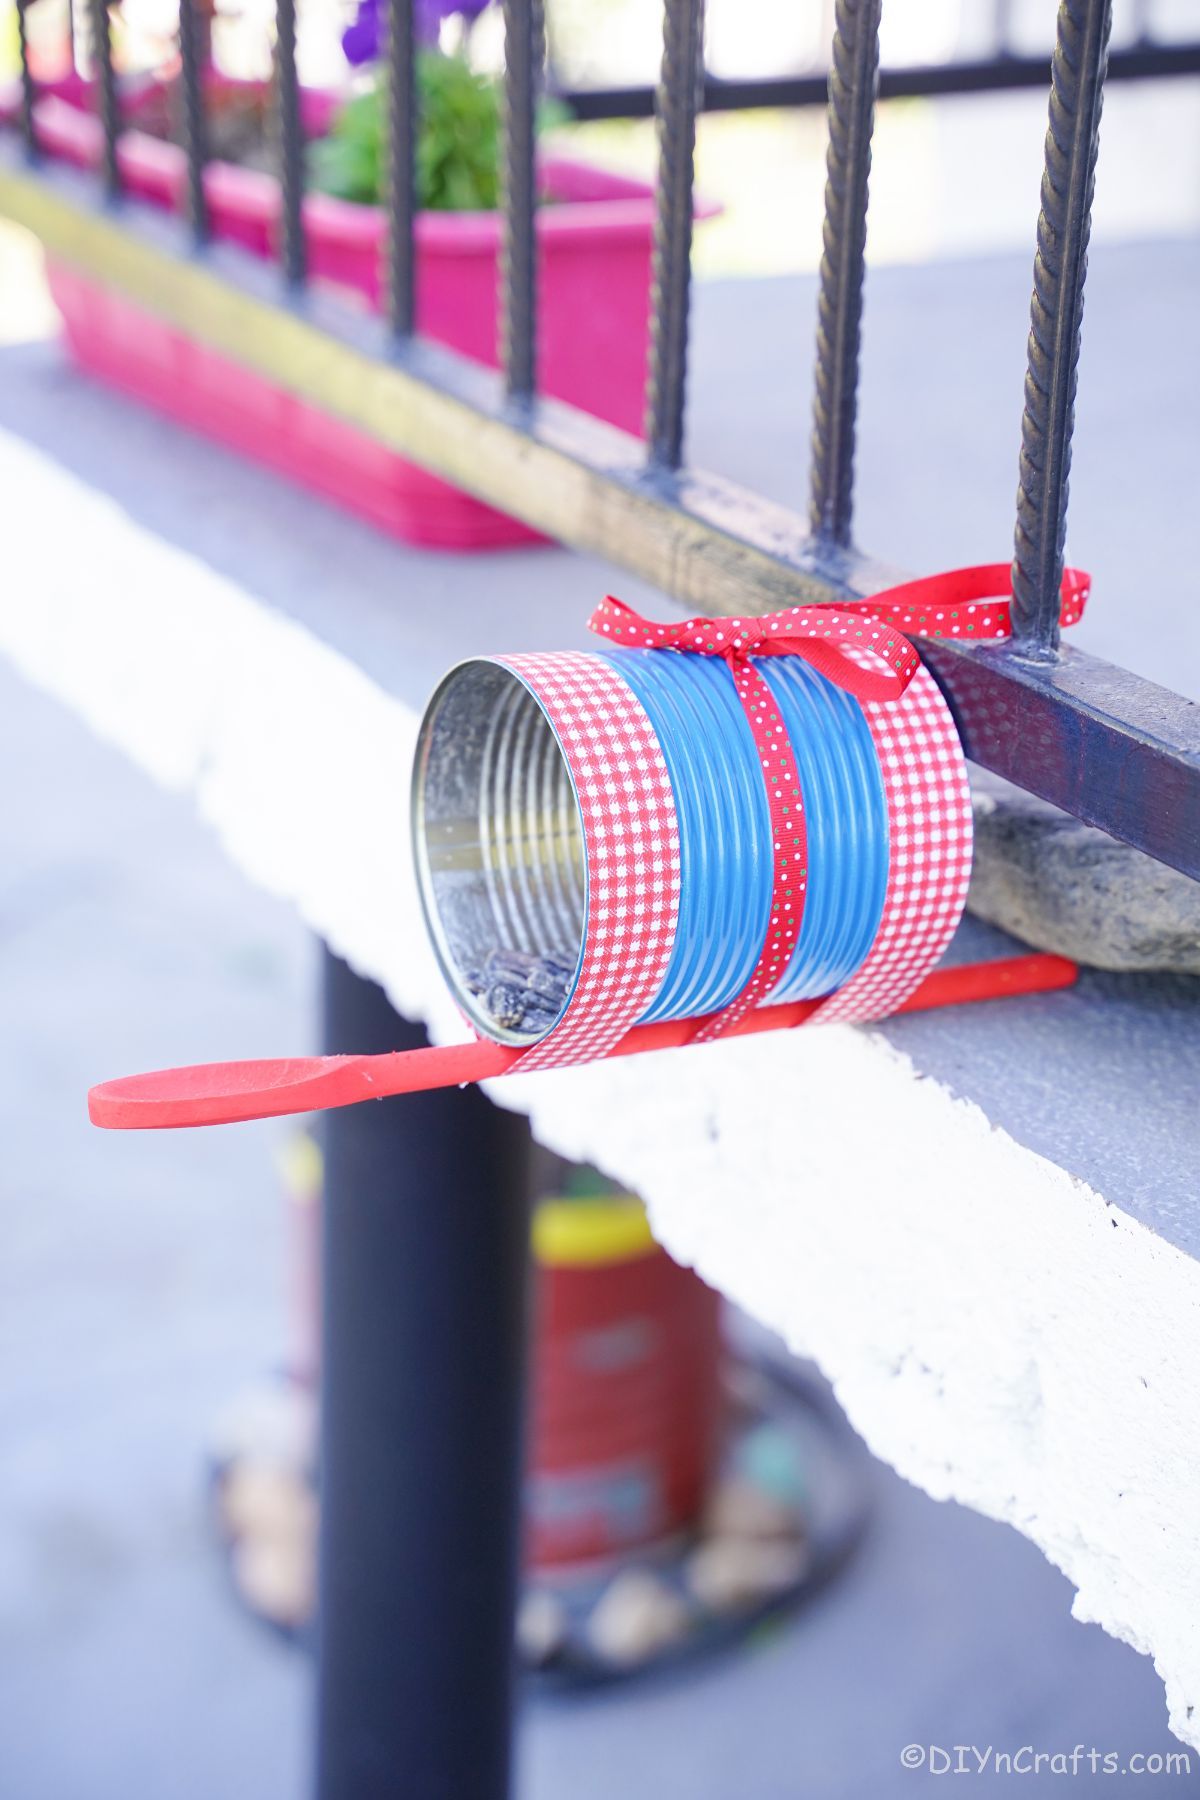 bird feeder made of a painted tin can on edge of porch